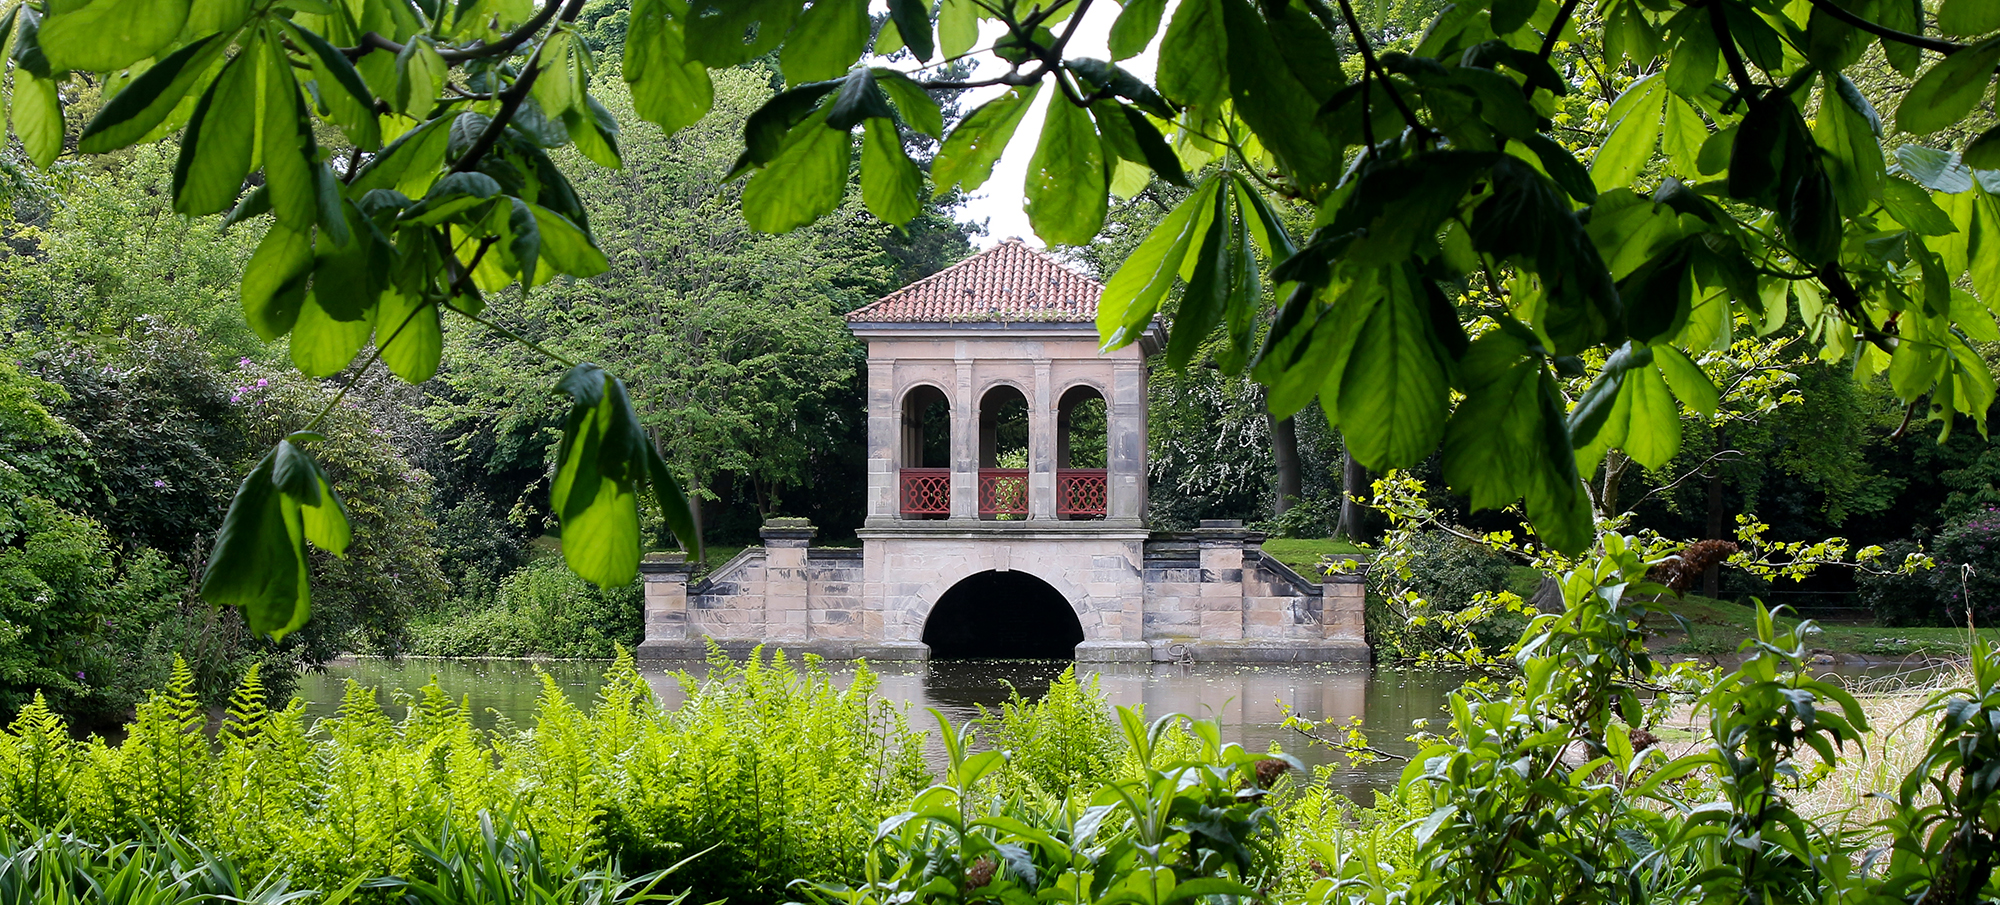 View across the lake to the Roman Boathouse in Birkenhead Park, The Wirral